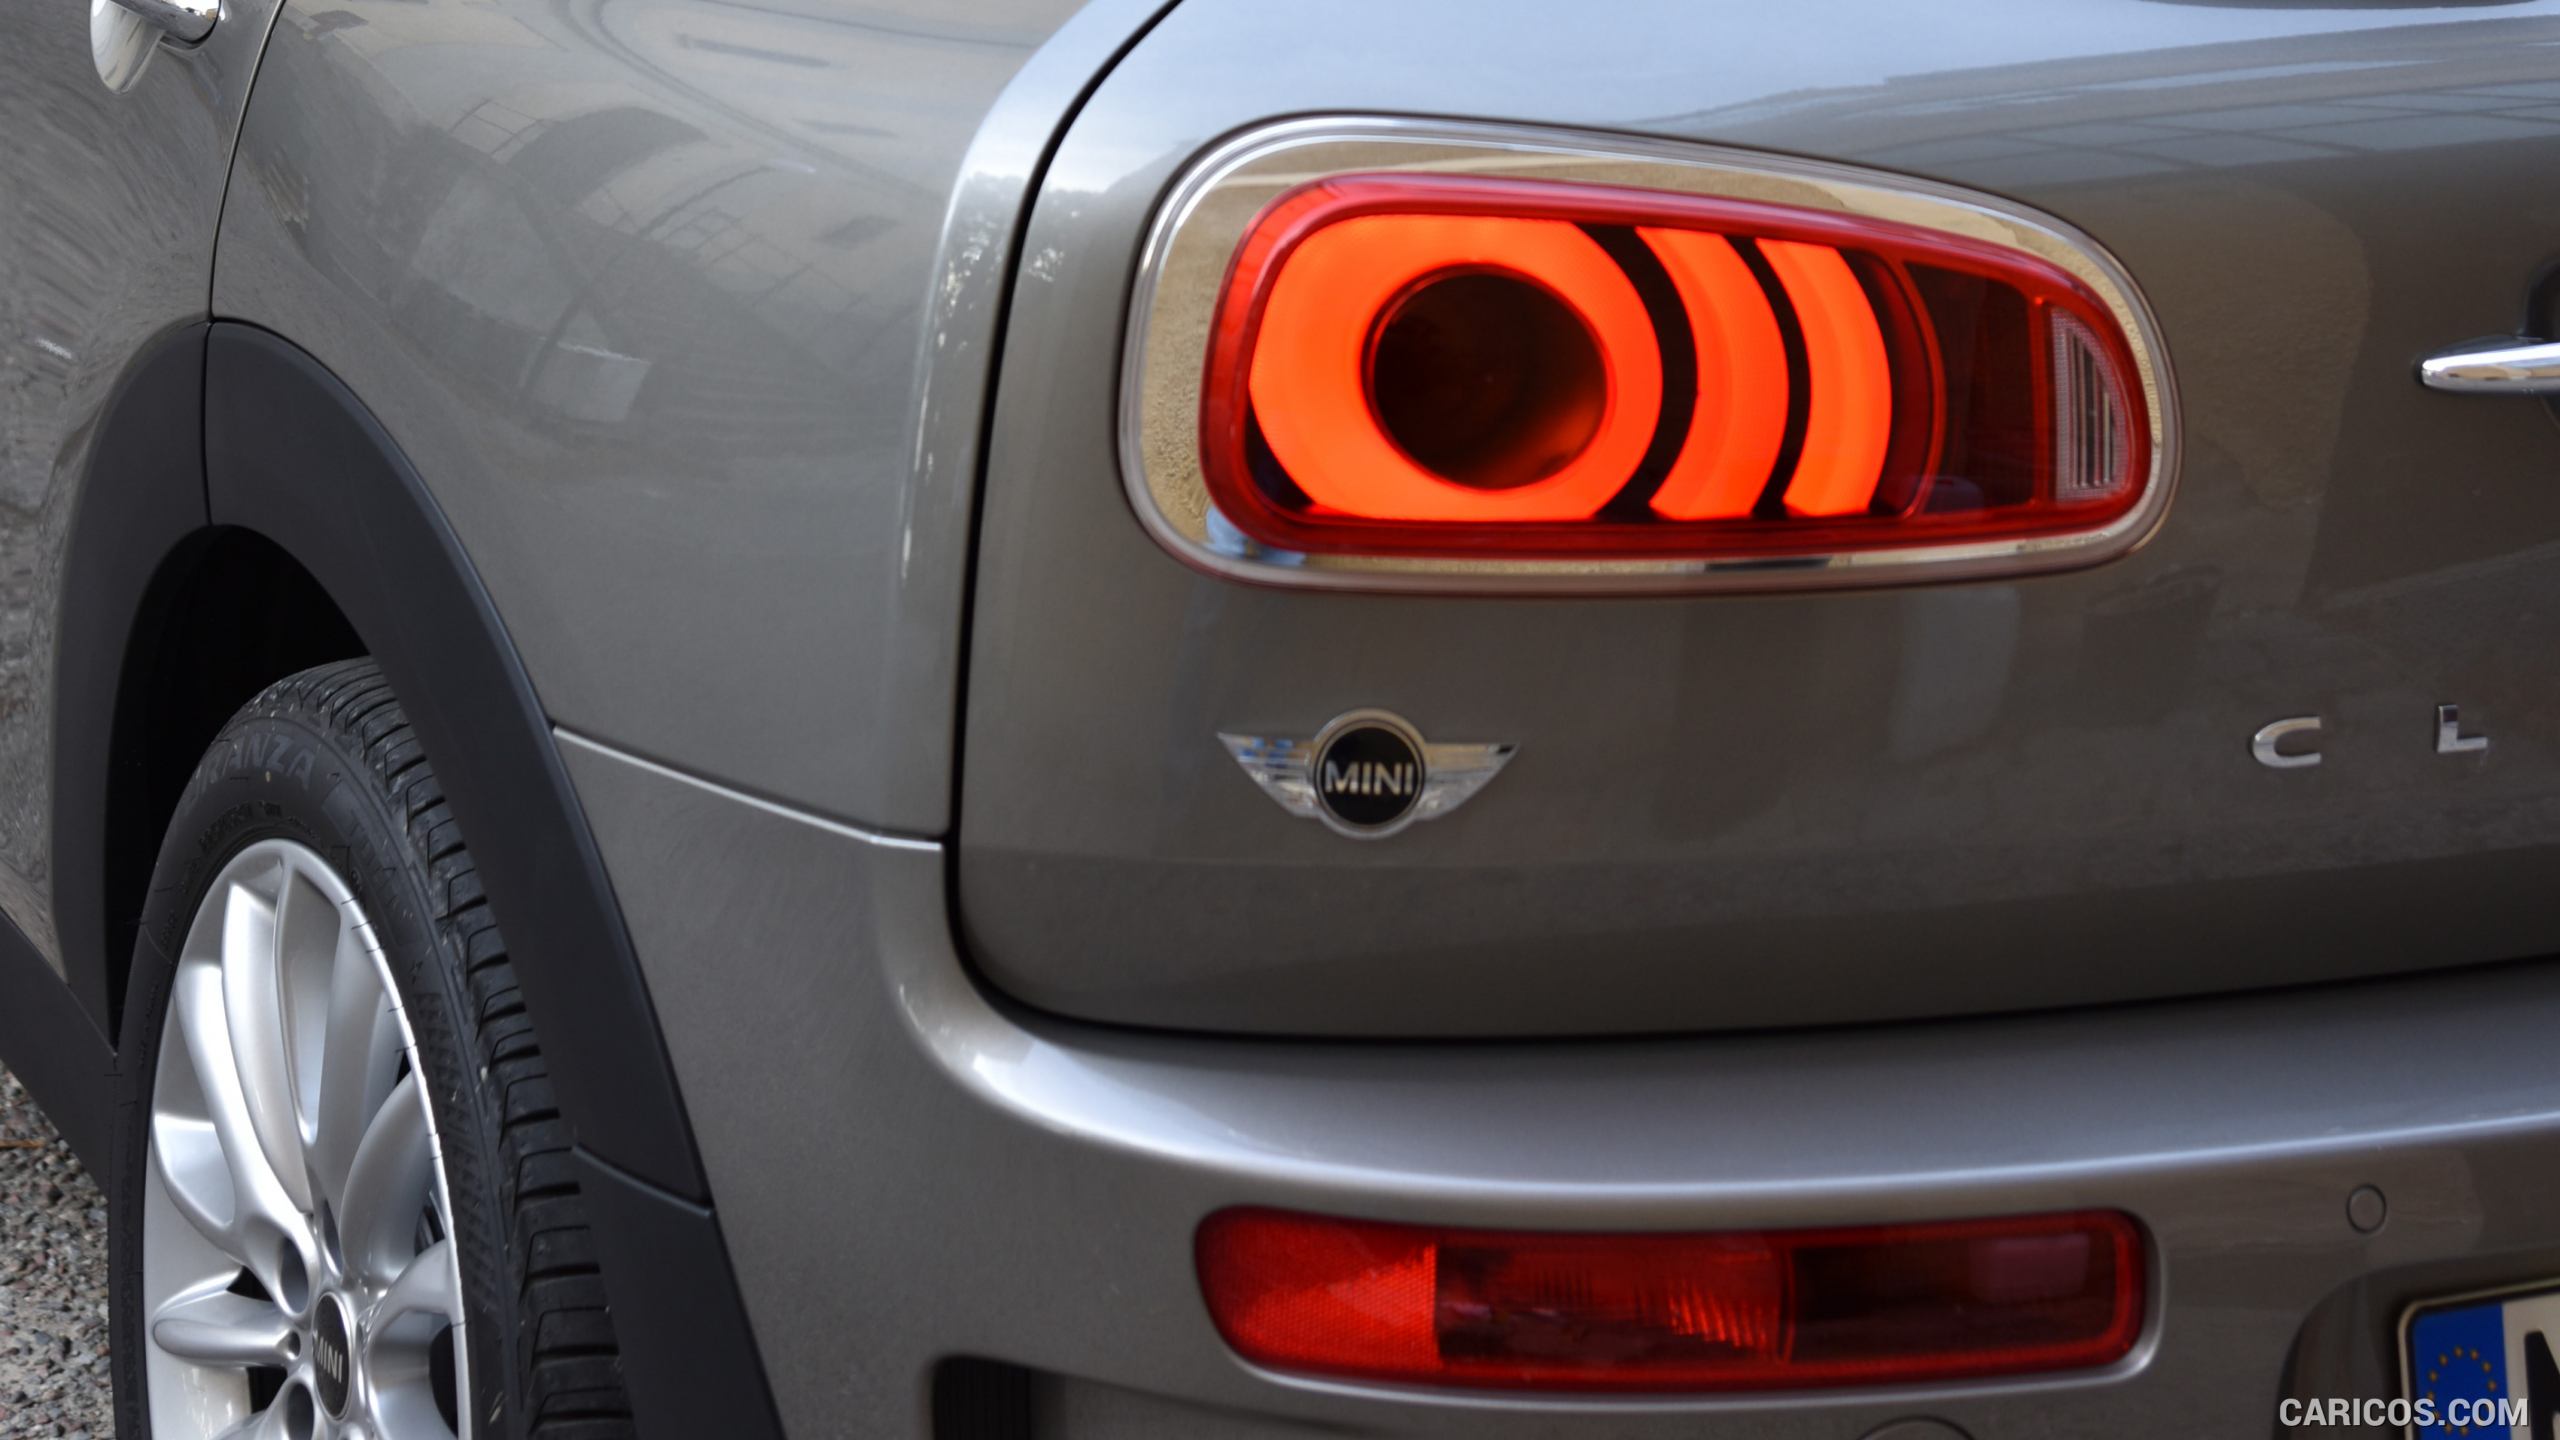 2016 MINI Cooper S Clubman in Metallic Melting Silver - Tail Light, #177 of 380